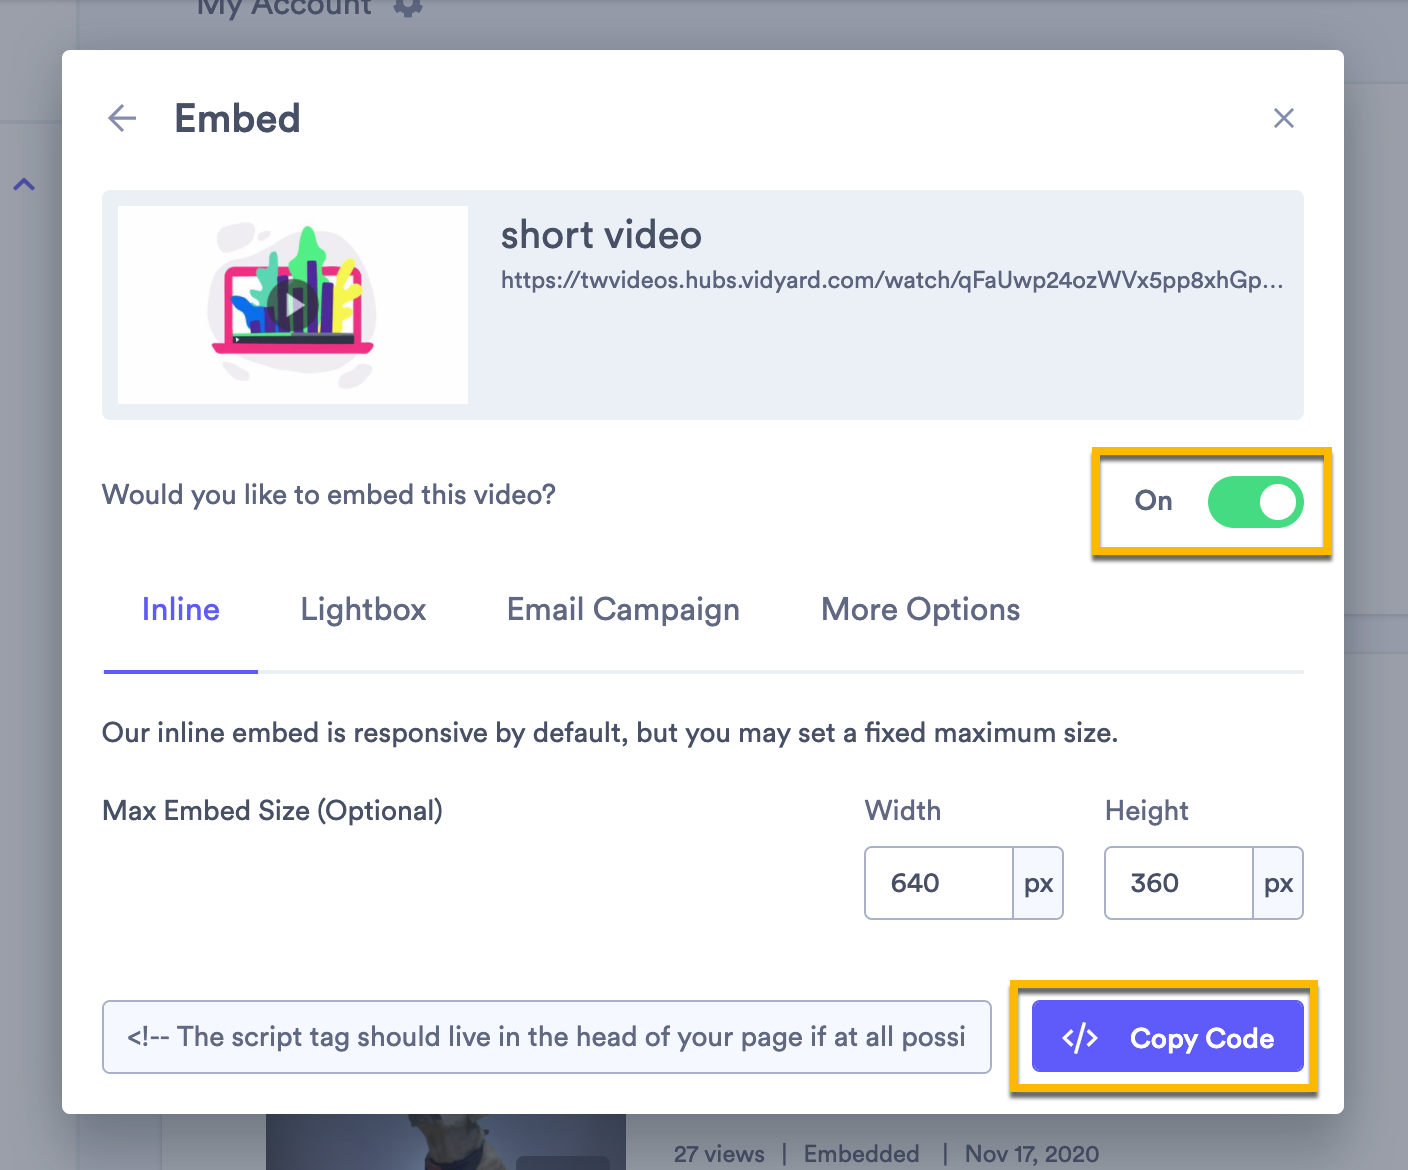 Copying the embed code for a video in your Vidyard library